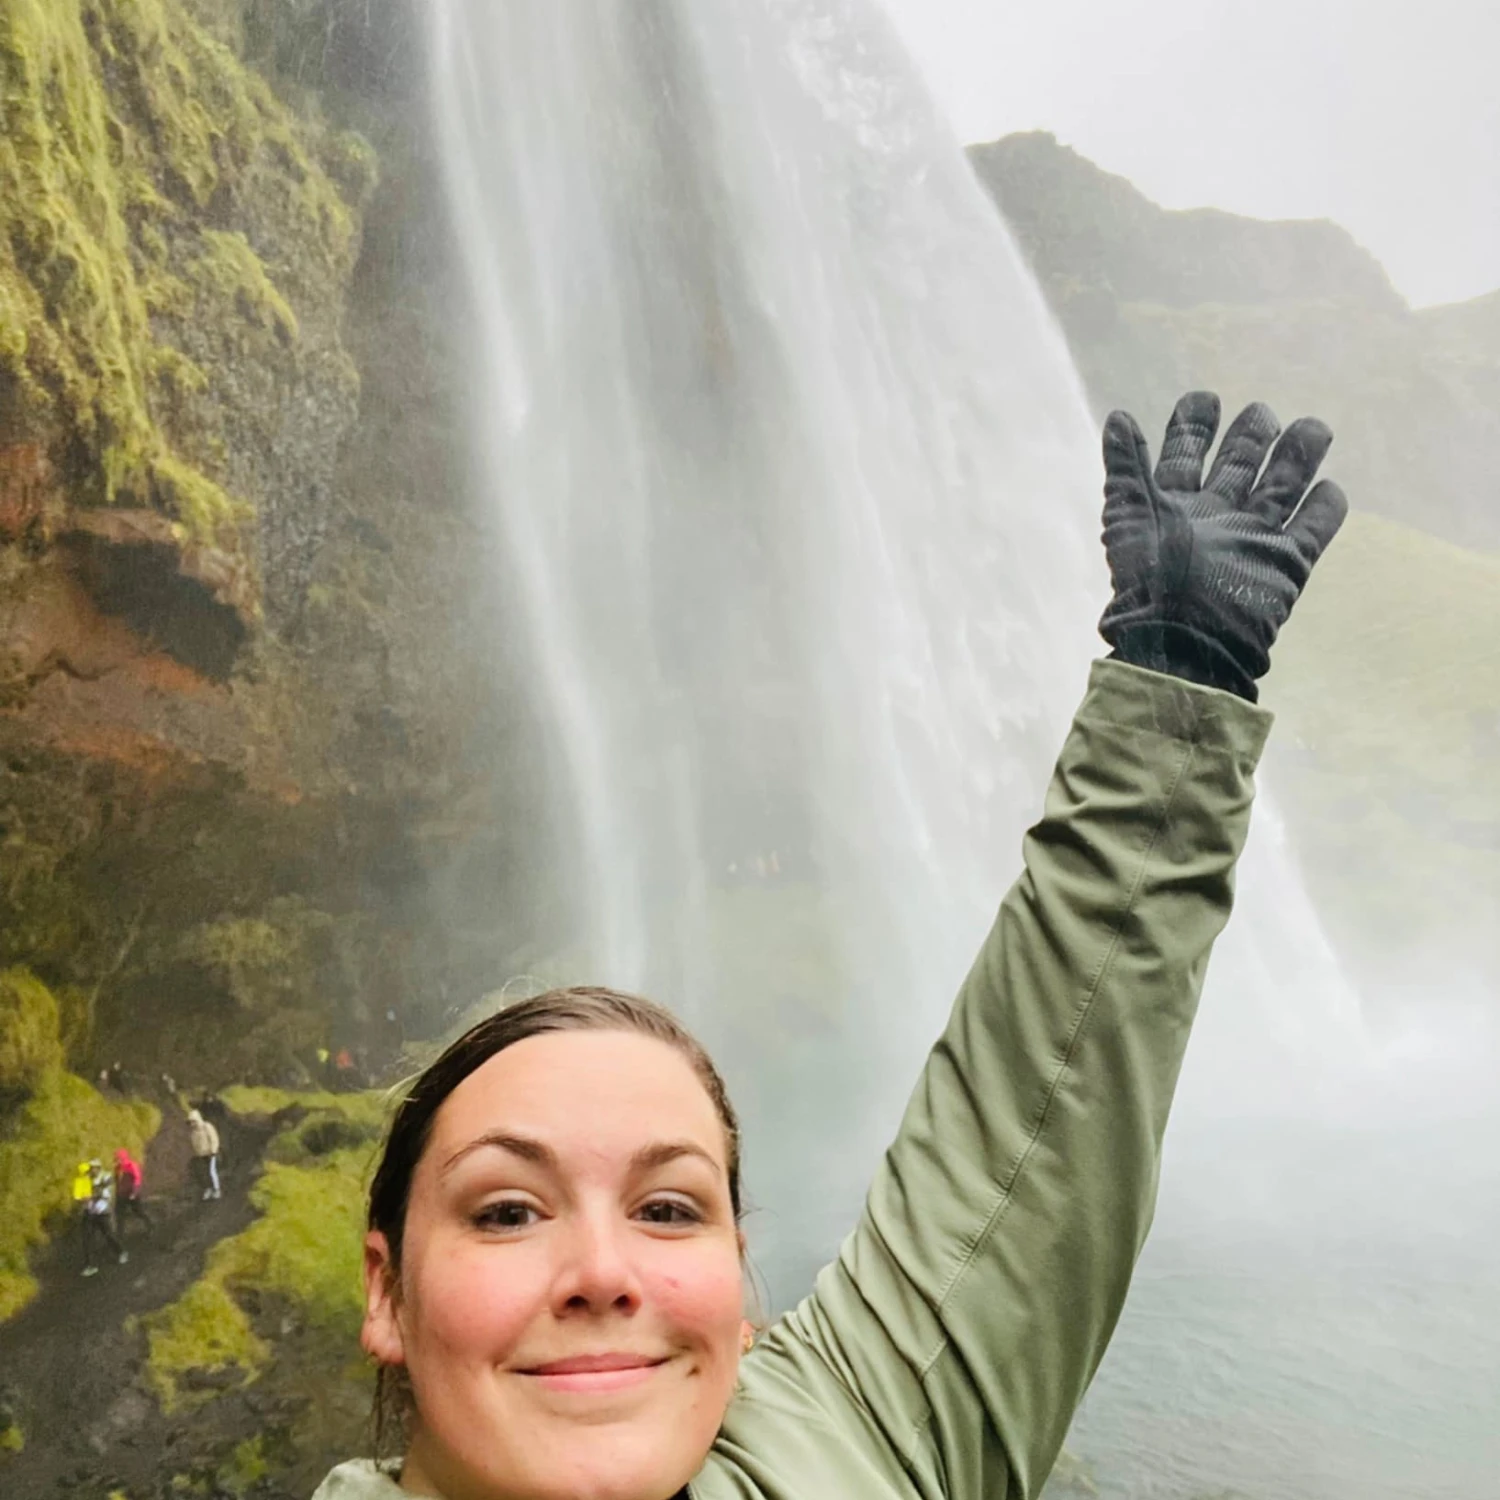 Travel advisor posing in front of a waterfall